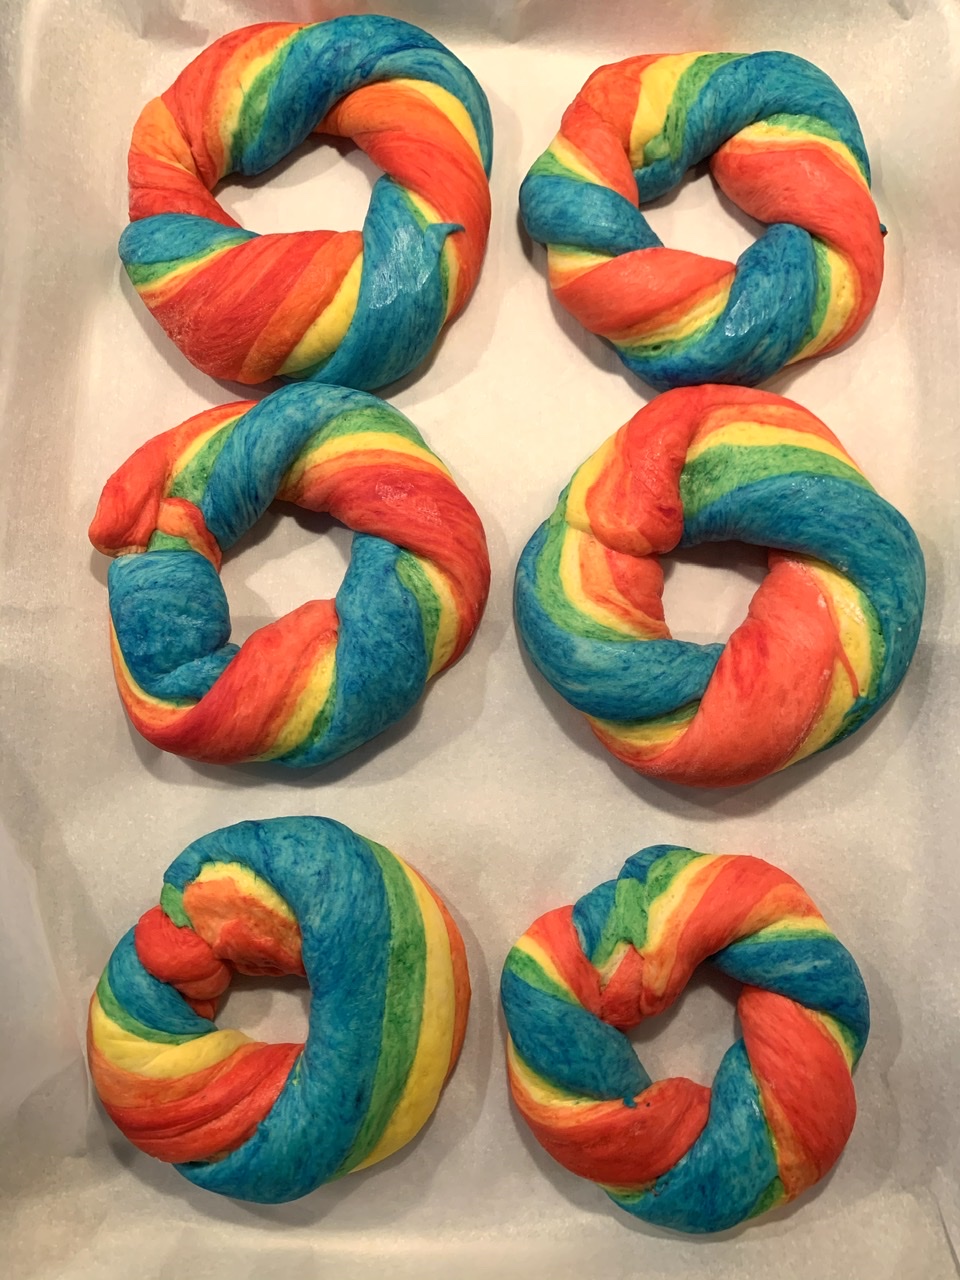 How to Make Colorful Rainbow Bagels!